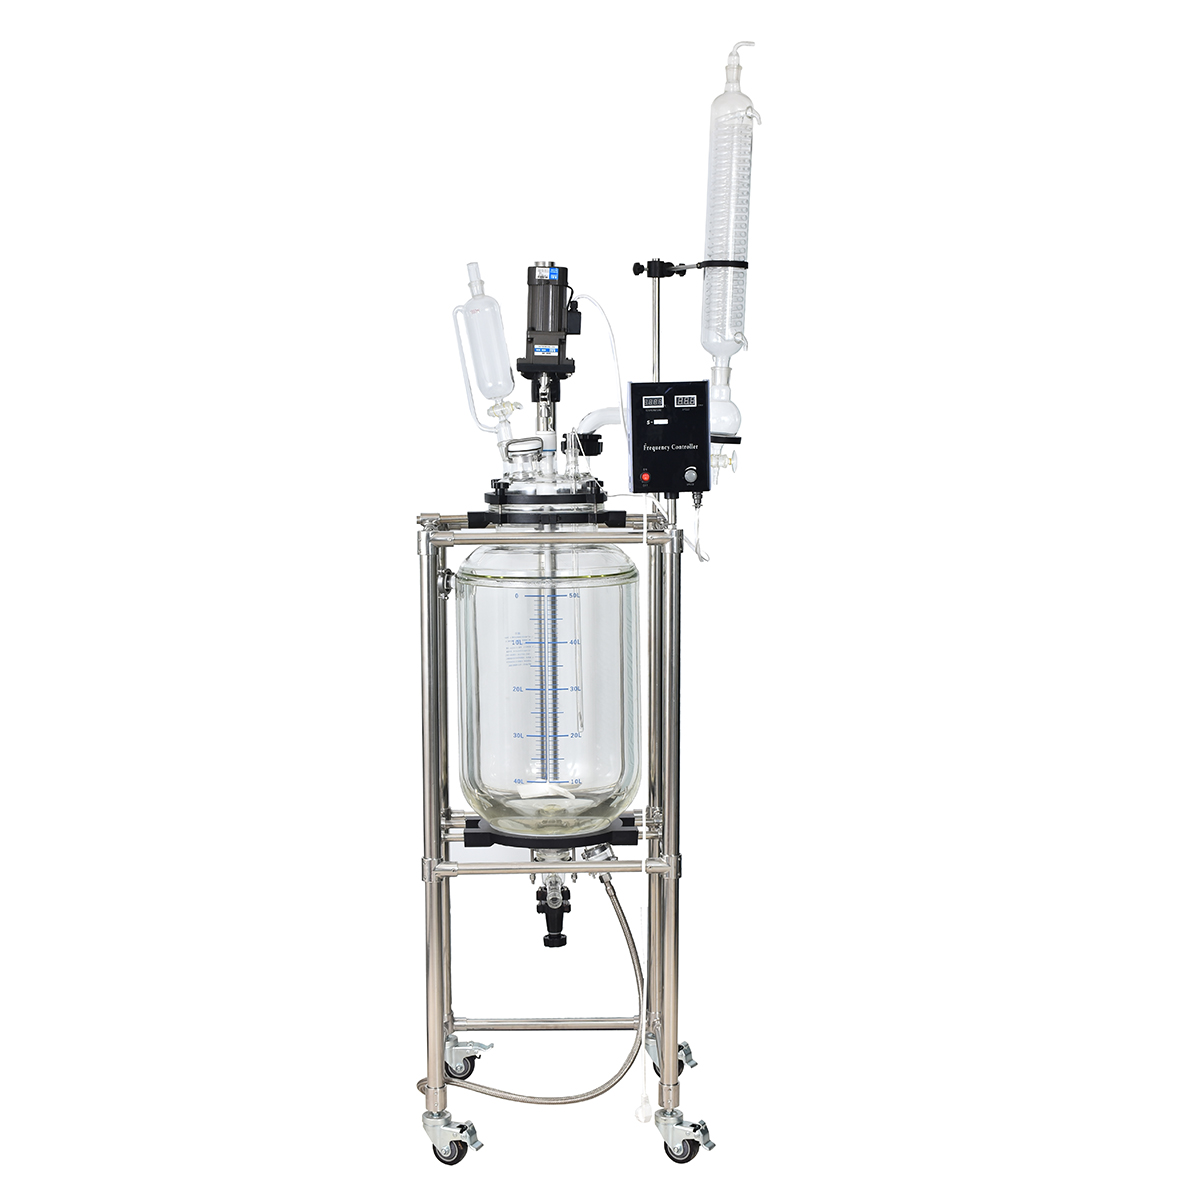 S-100L Jacketed Glass Reactor